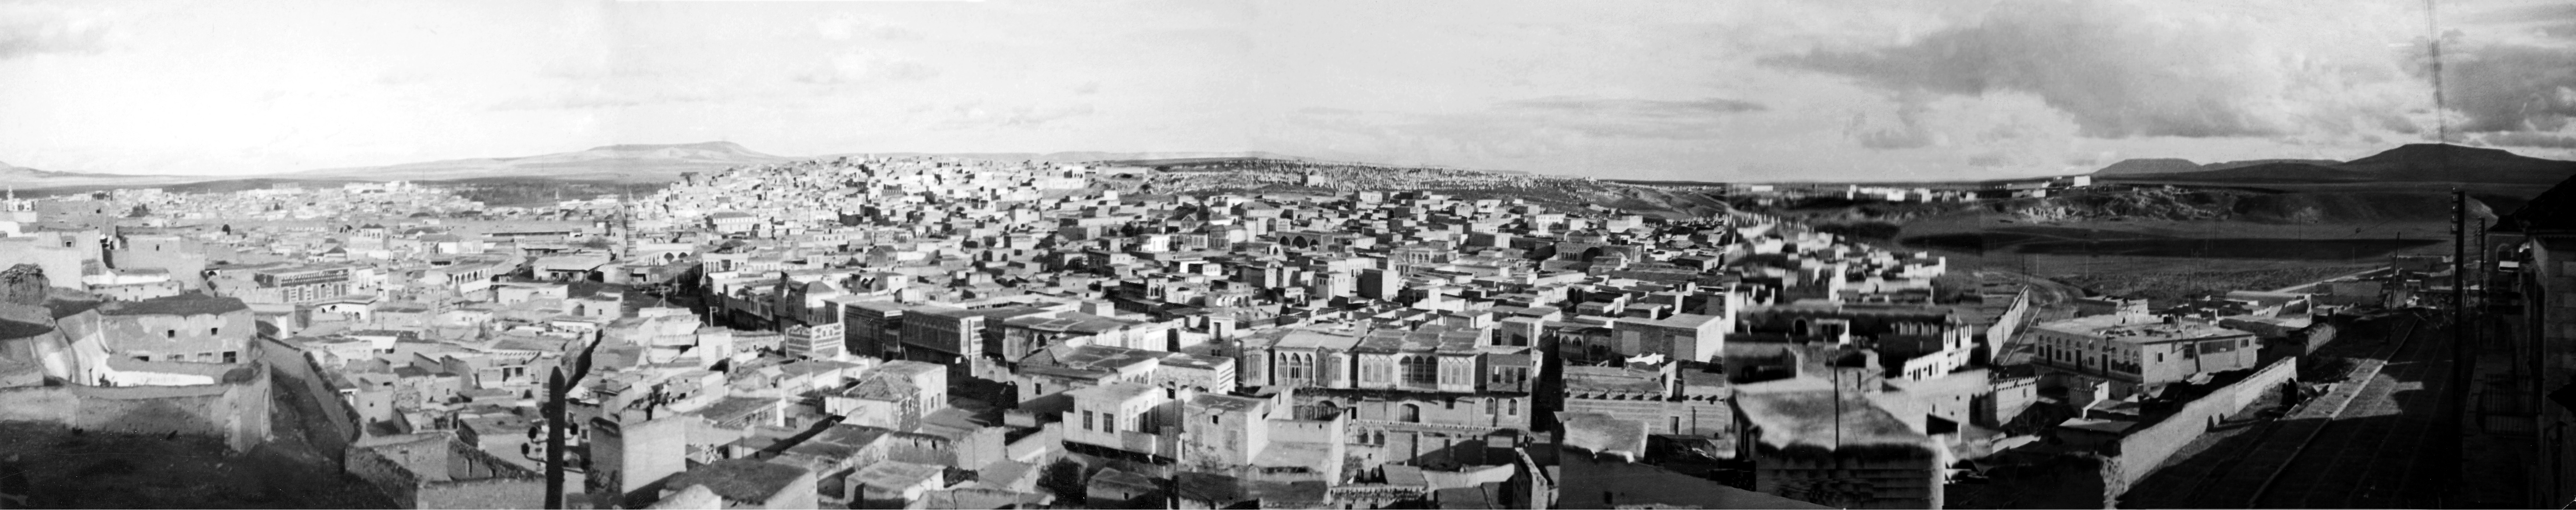  Hama - <p><strong>Hama - view of Al-Mahalba and Al-Hawarneh Areas</strong></p><p>This view of the southern part of old Hama city heads northeast and encompasses the Al-Mahalba and Al-Hawarneh areas. Prominent in the scene is Al-Jesser Street, with the standout Shishakli Palace featuring upper balconies and adorned windows. The distant view includes the al-Farraiya quarter and a cemetery.</p>